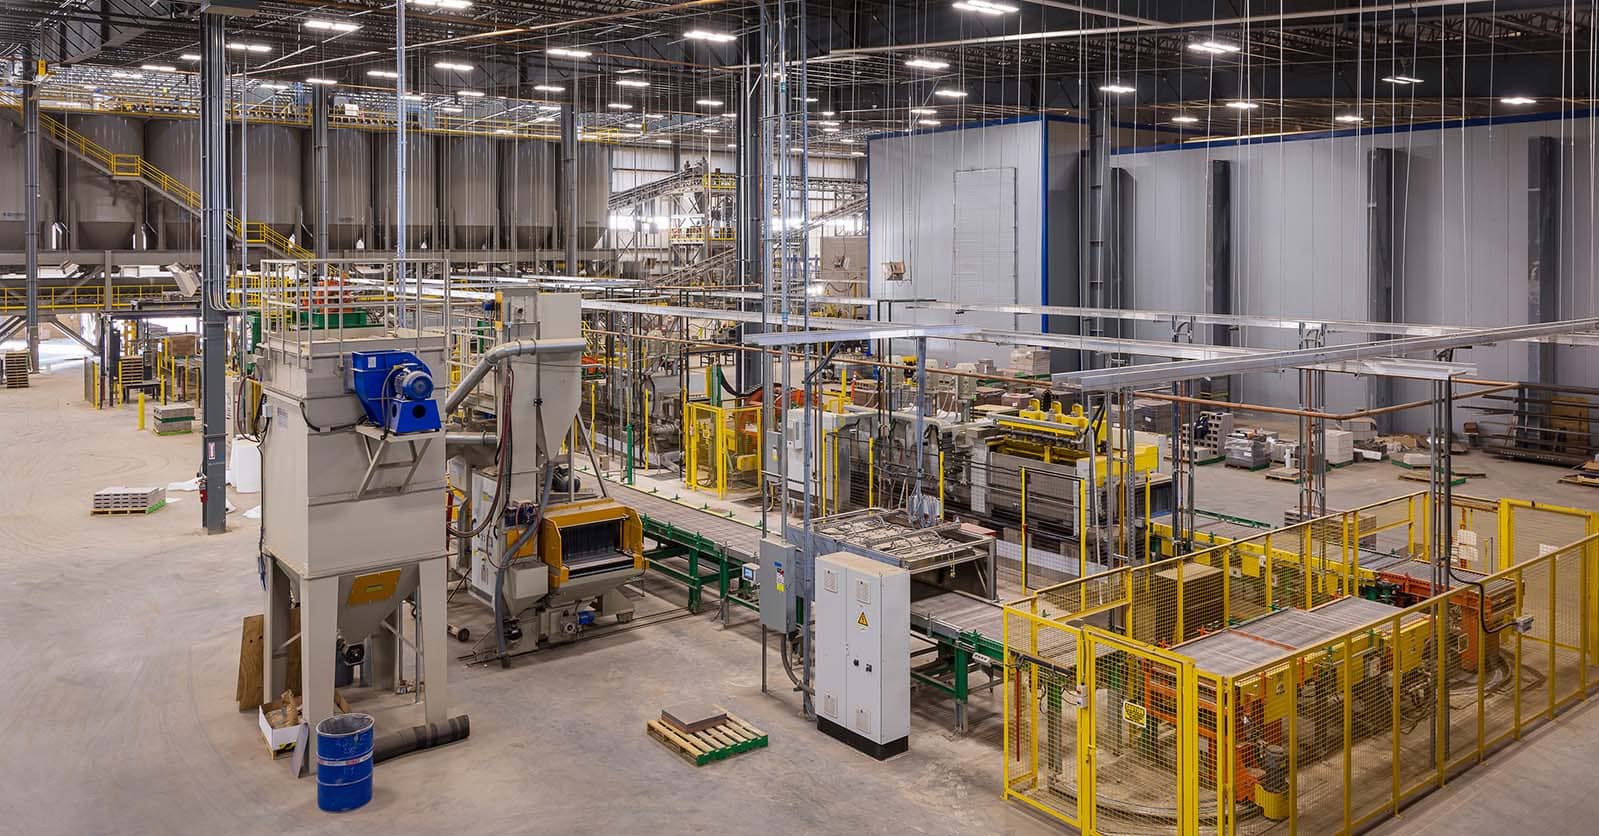 Basalite Plant in Fort Lupton, Colorado Completes